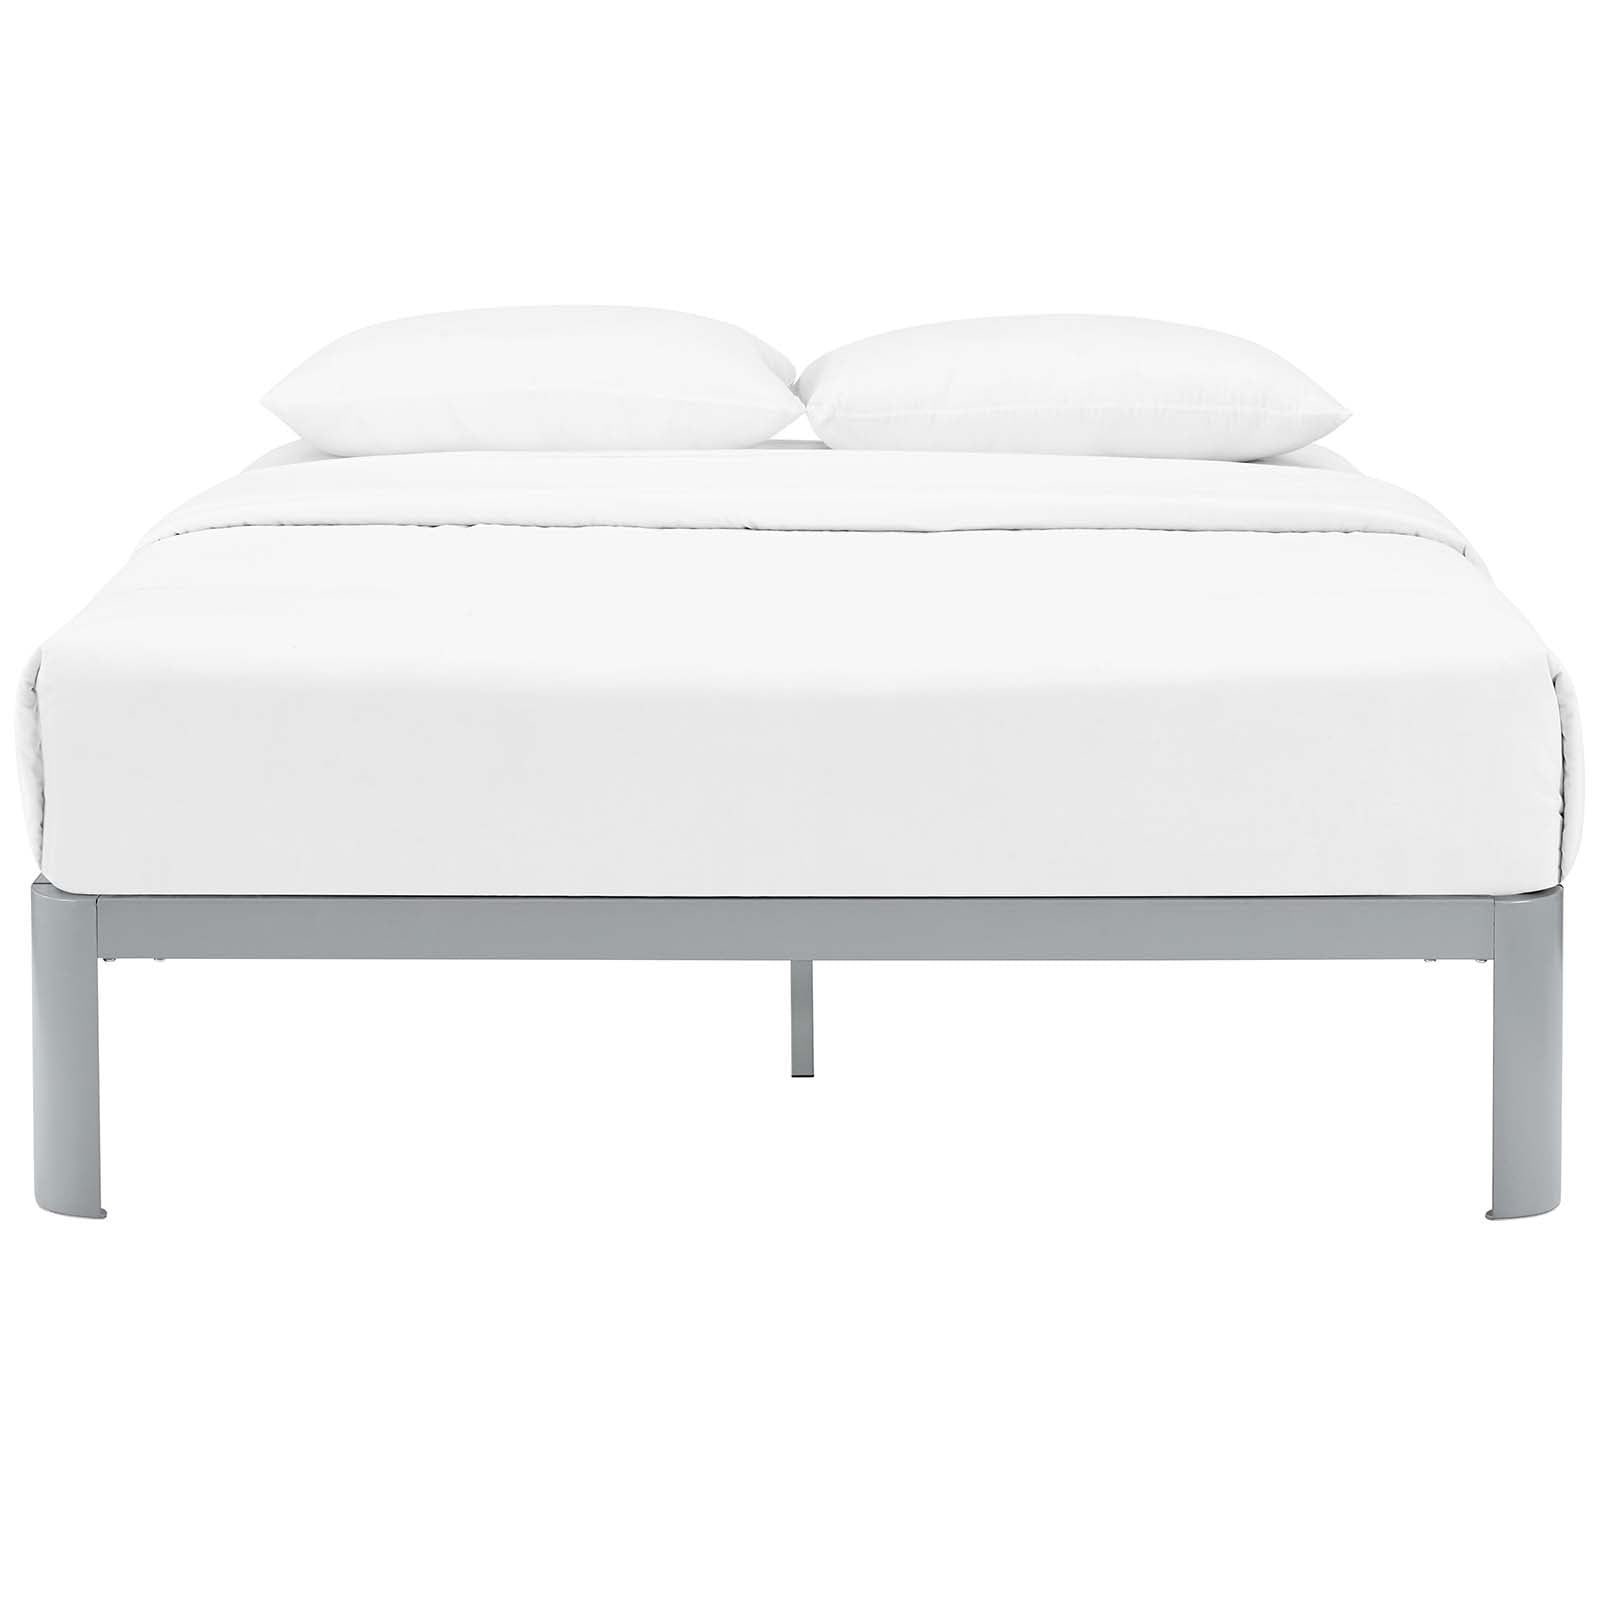 Modway Beds - Corinne Queen Bed Frame Gray